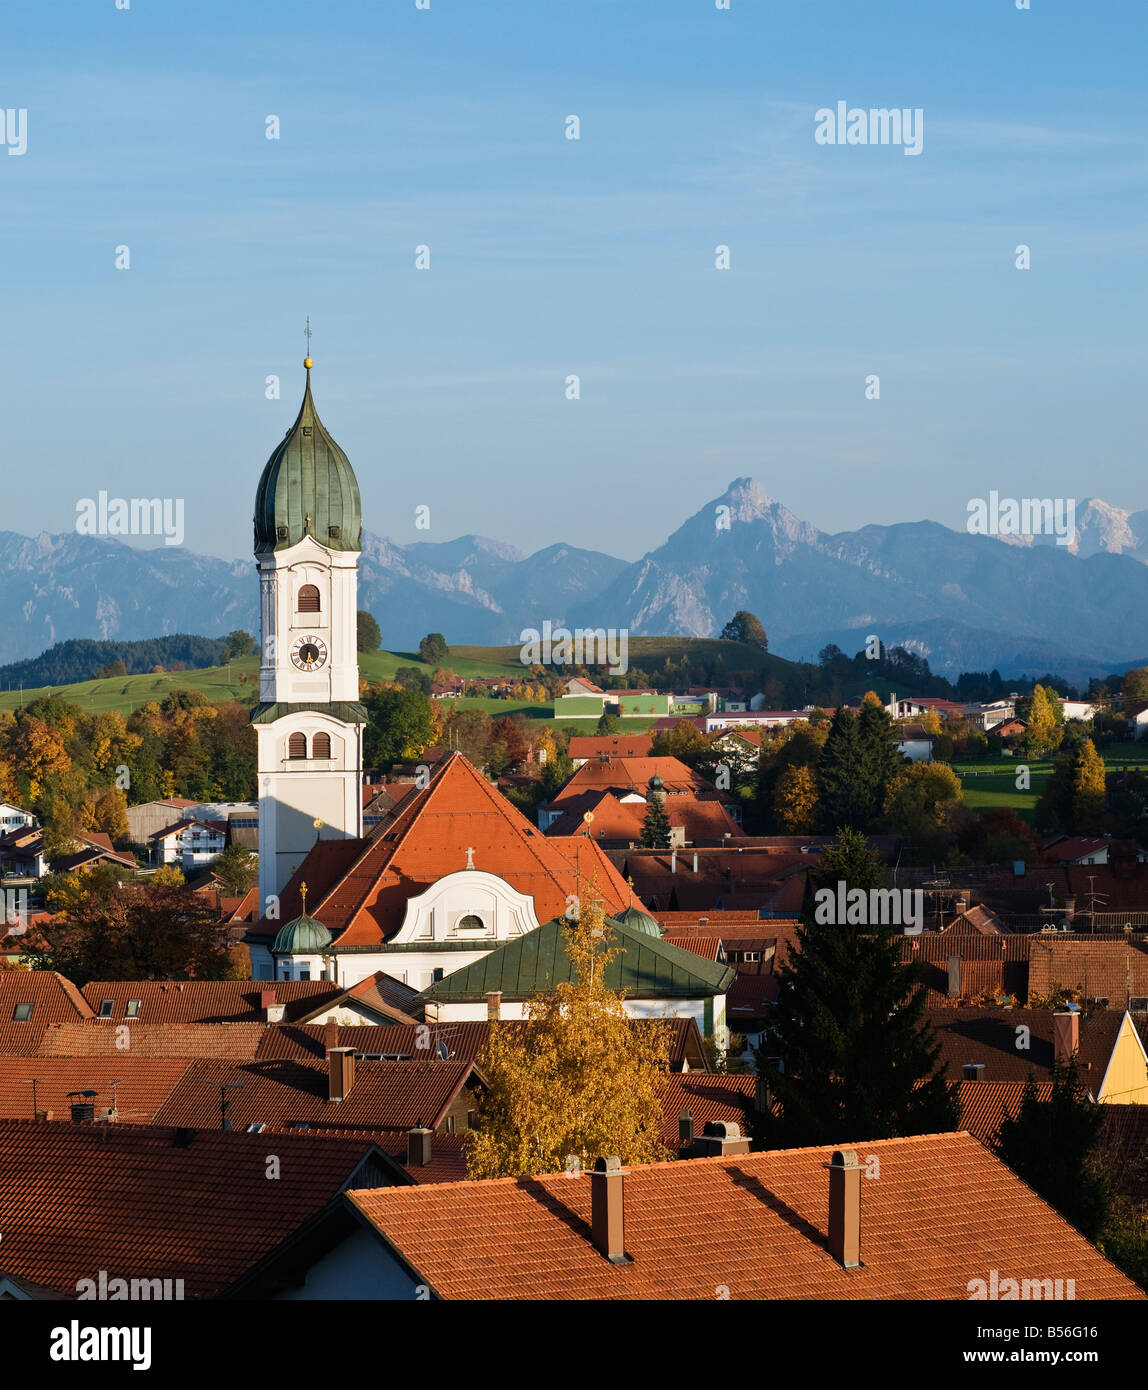 Tower of Saint Andreas Chuch and mountains of Allgaeu region, Nesselwang, Germany Stock Photo